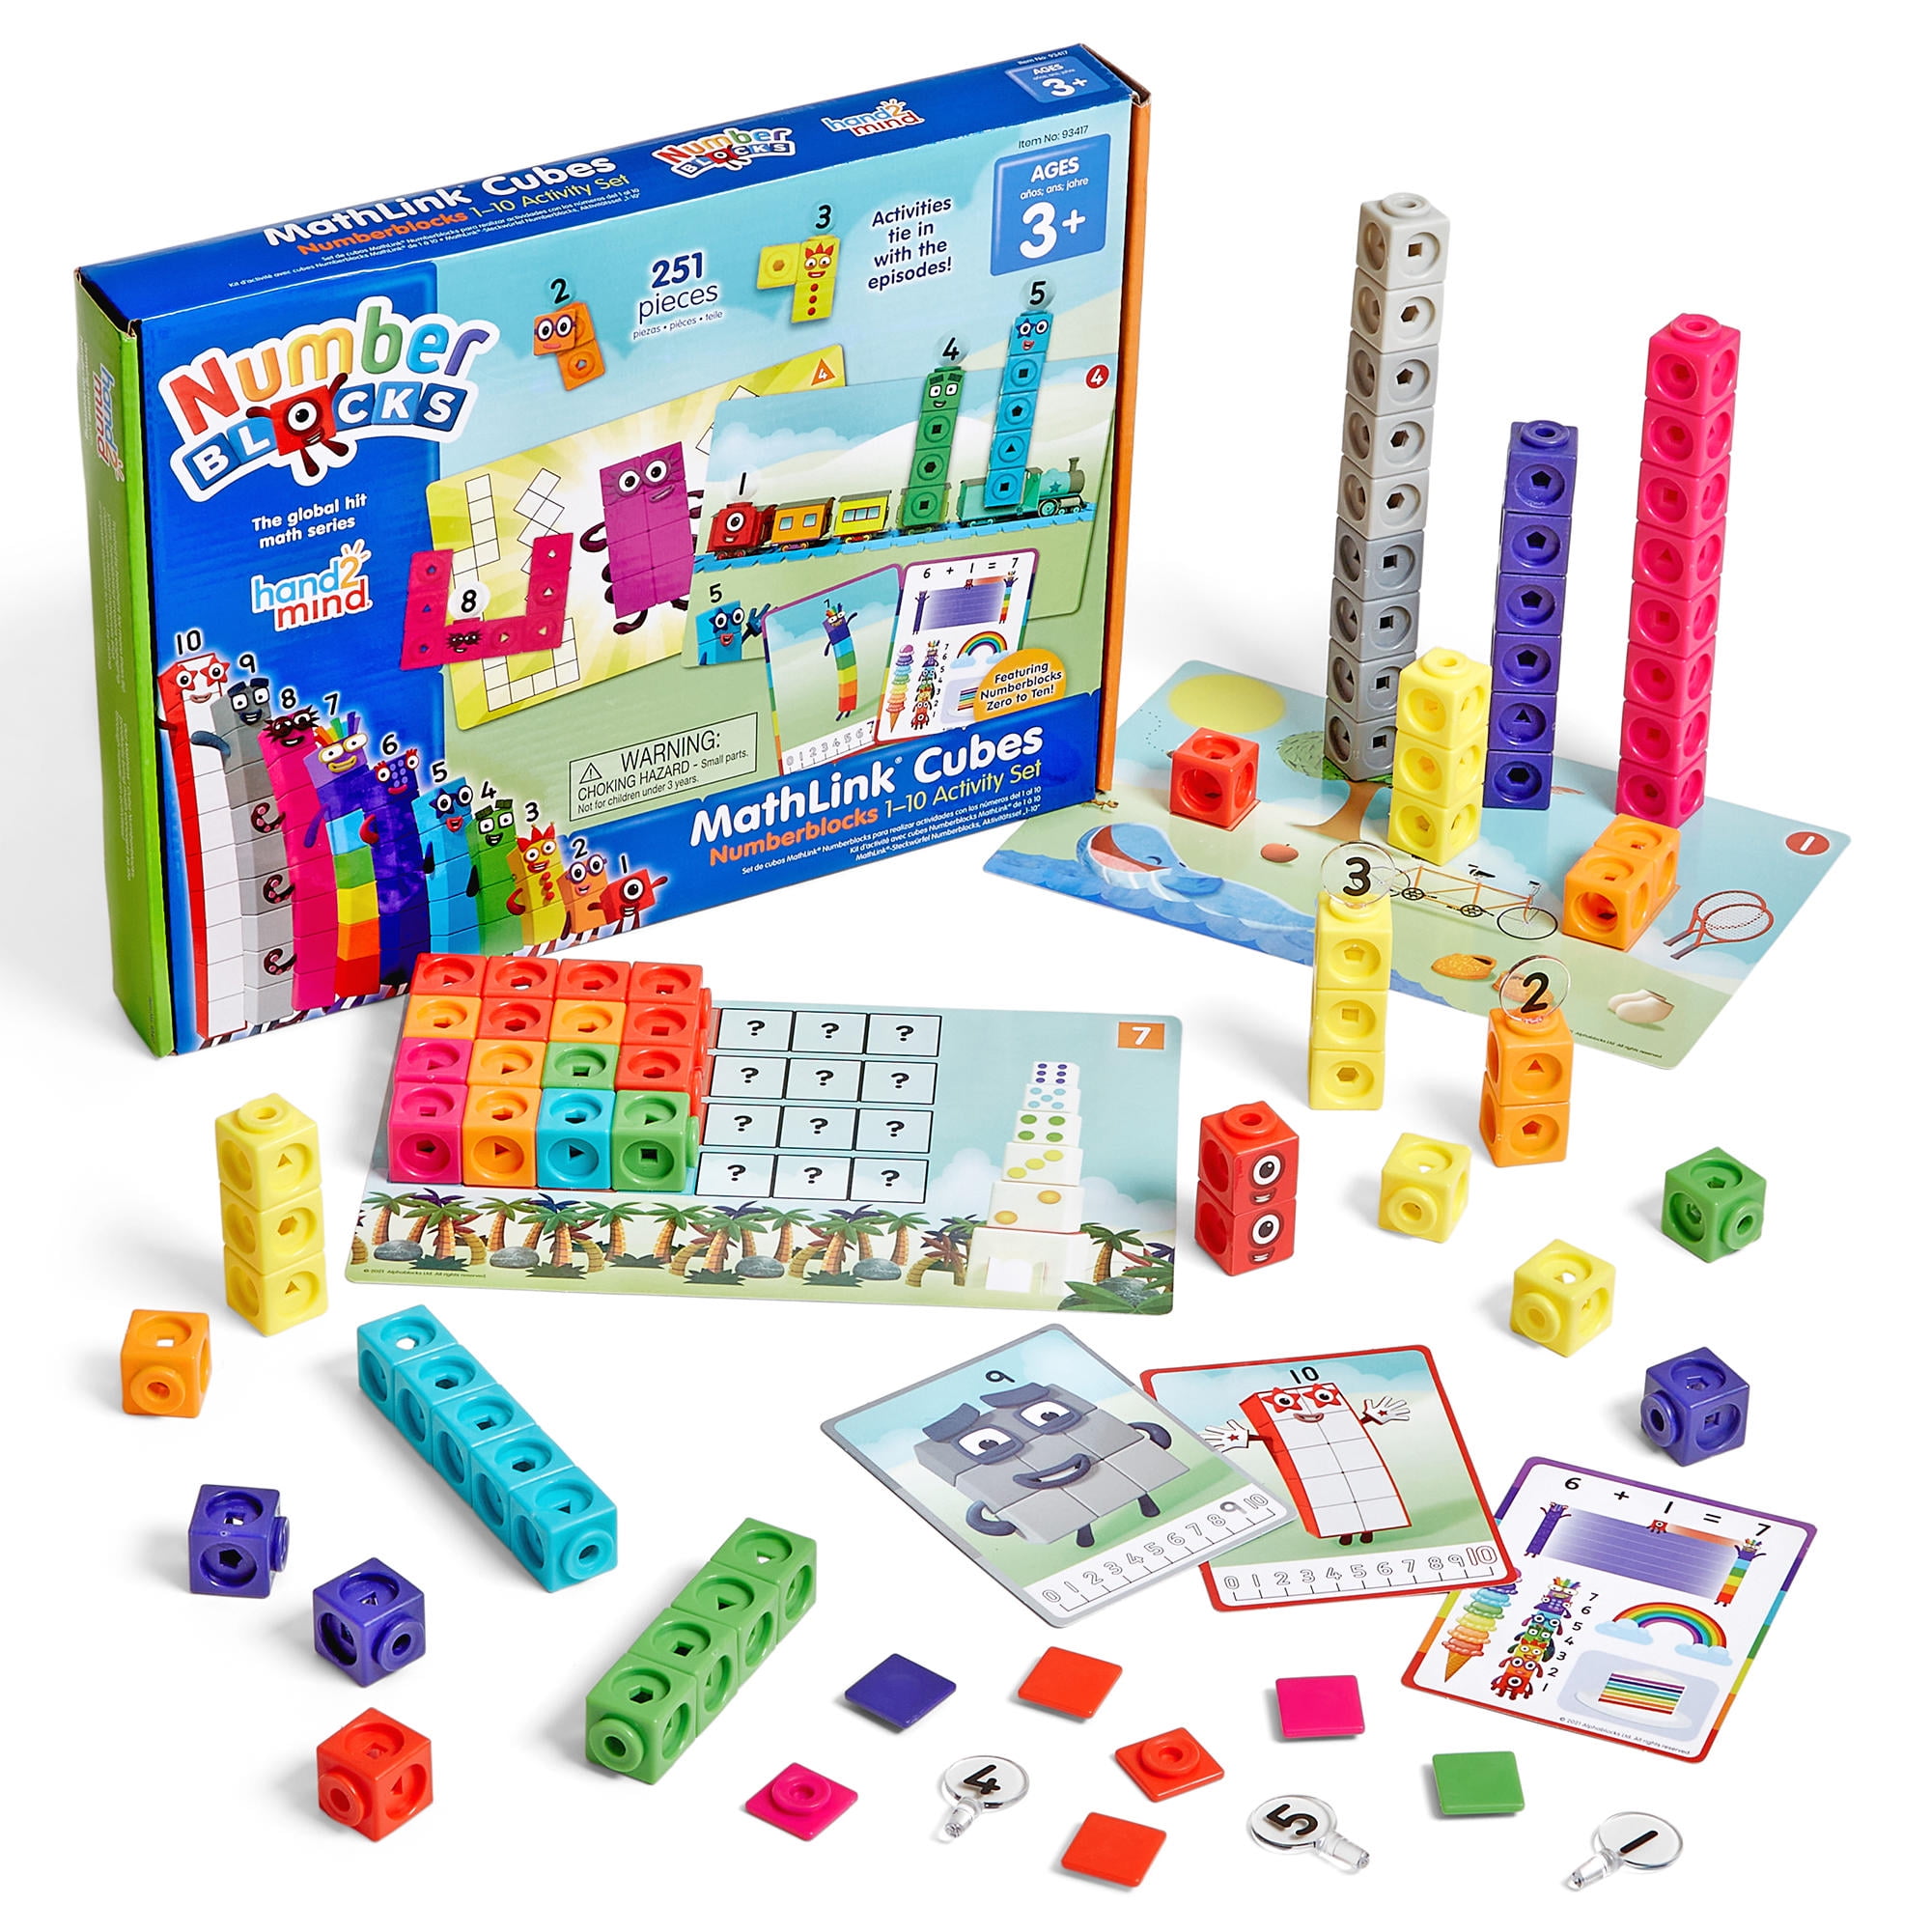 & Counters 200 Learning Guide & Storage Bag Set 100 Snap Multi Link Cubes 